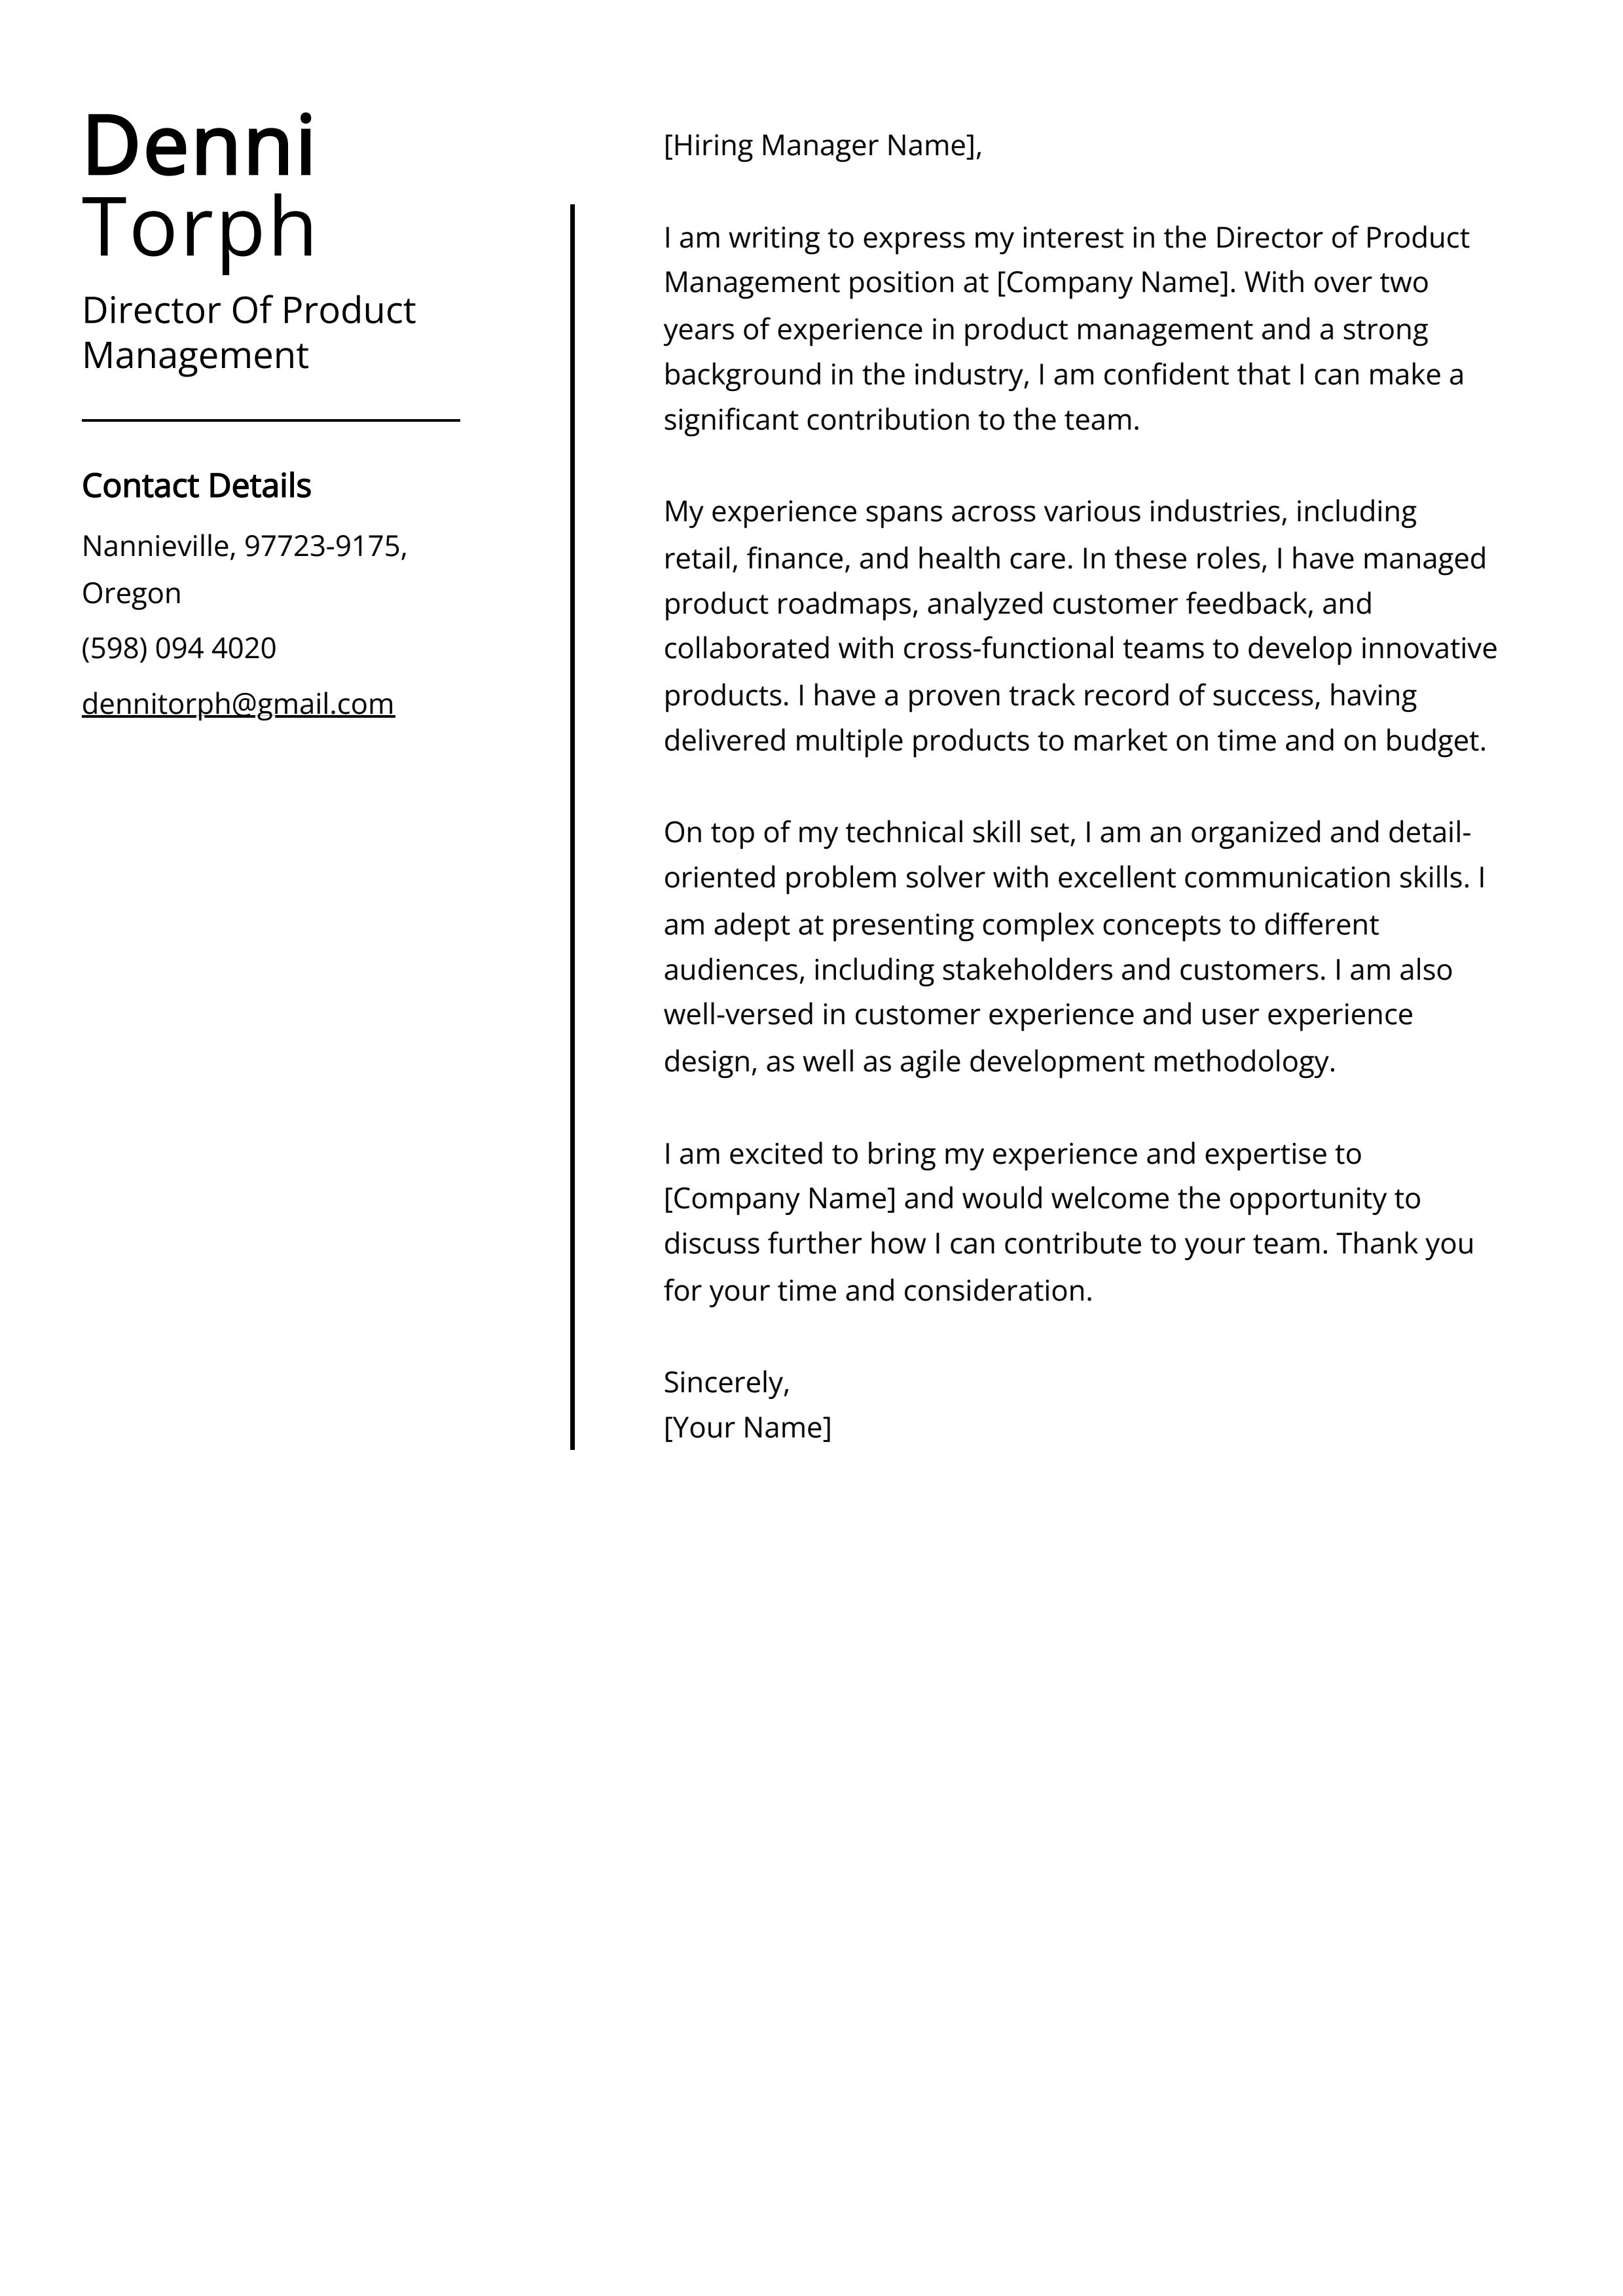 Director Of Product Management Cover Letter Example